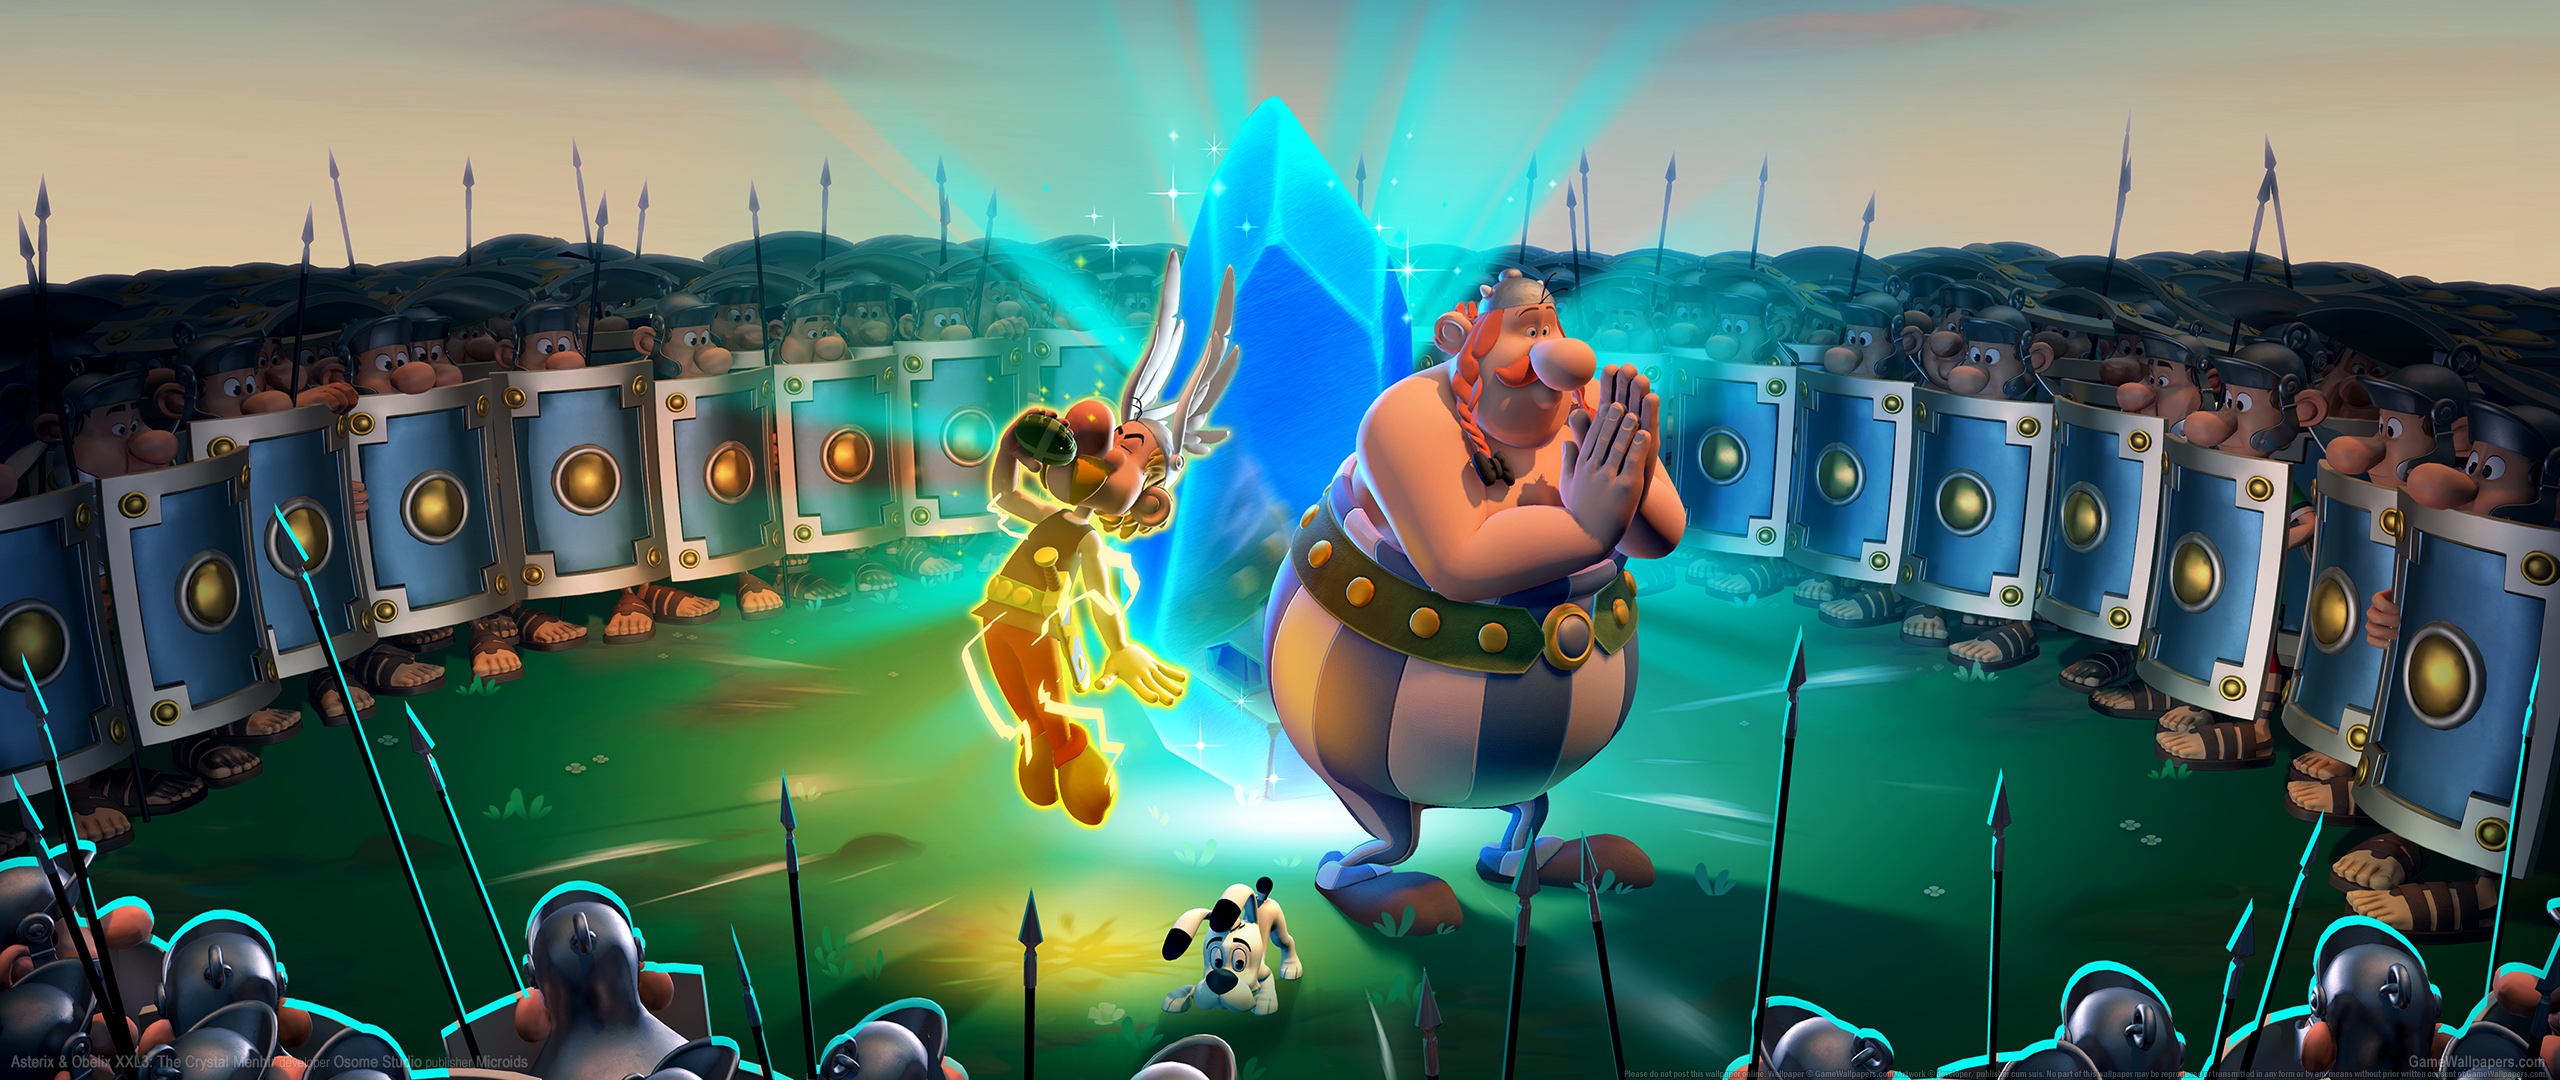 Asterix & Obelix XXL3: The Crystal Menhir 2560x1080 wallpaper or background 01